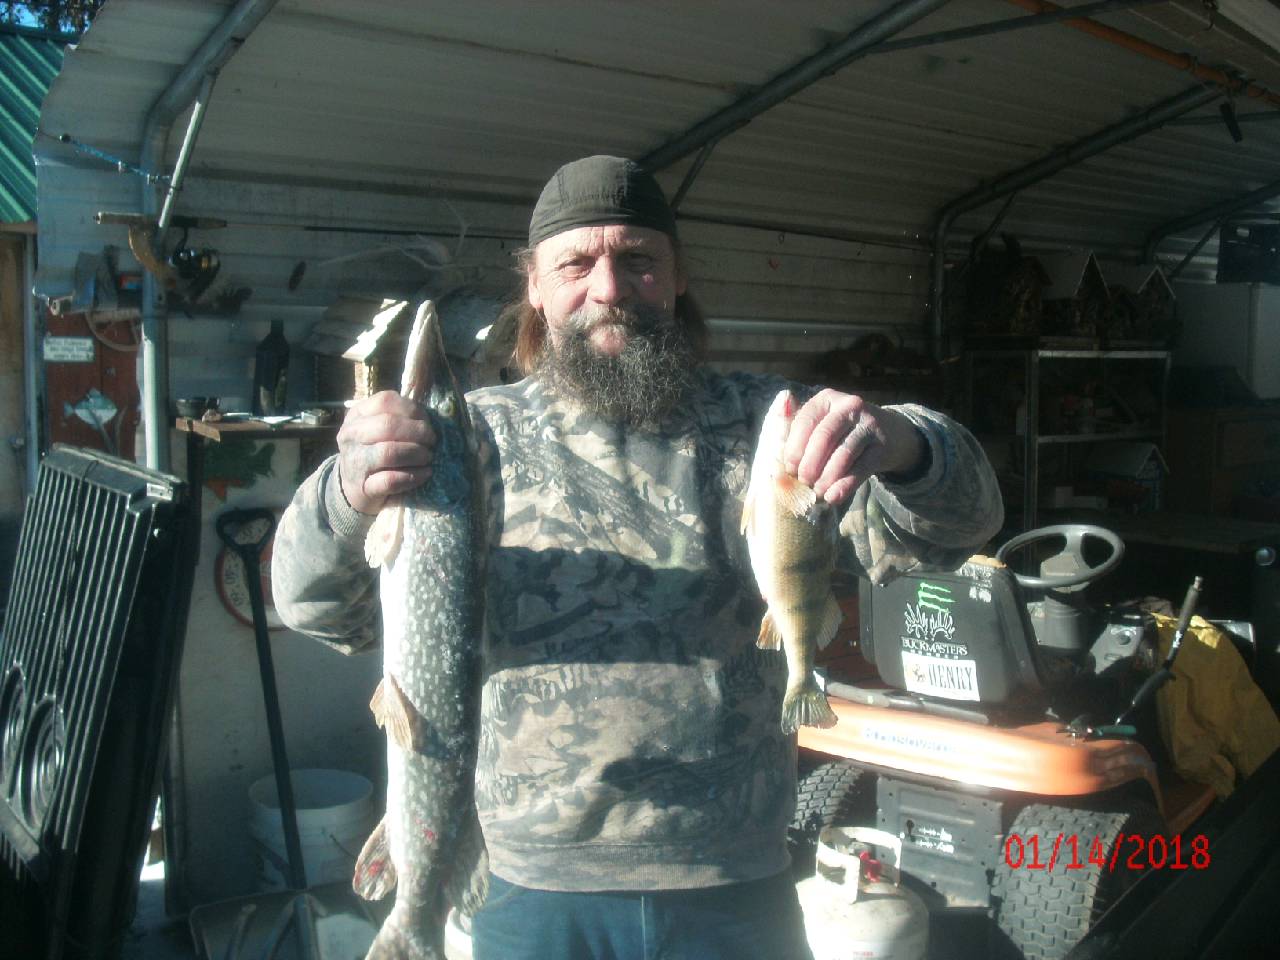 BUCK'S BAIT & TACKLE » Blog Archive » ICE FISHING IS COOL